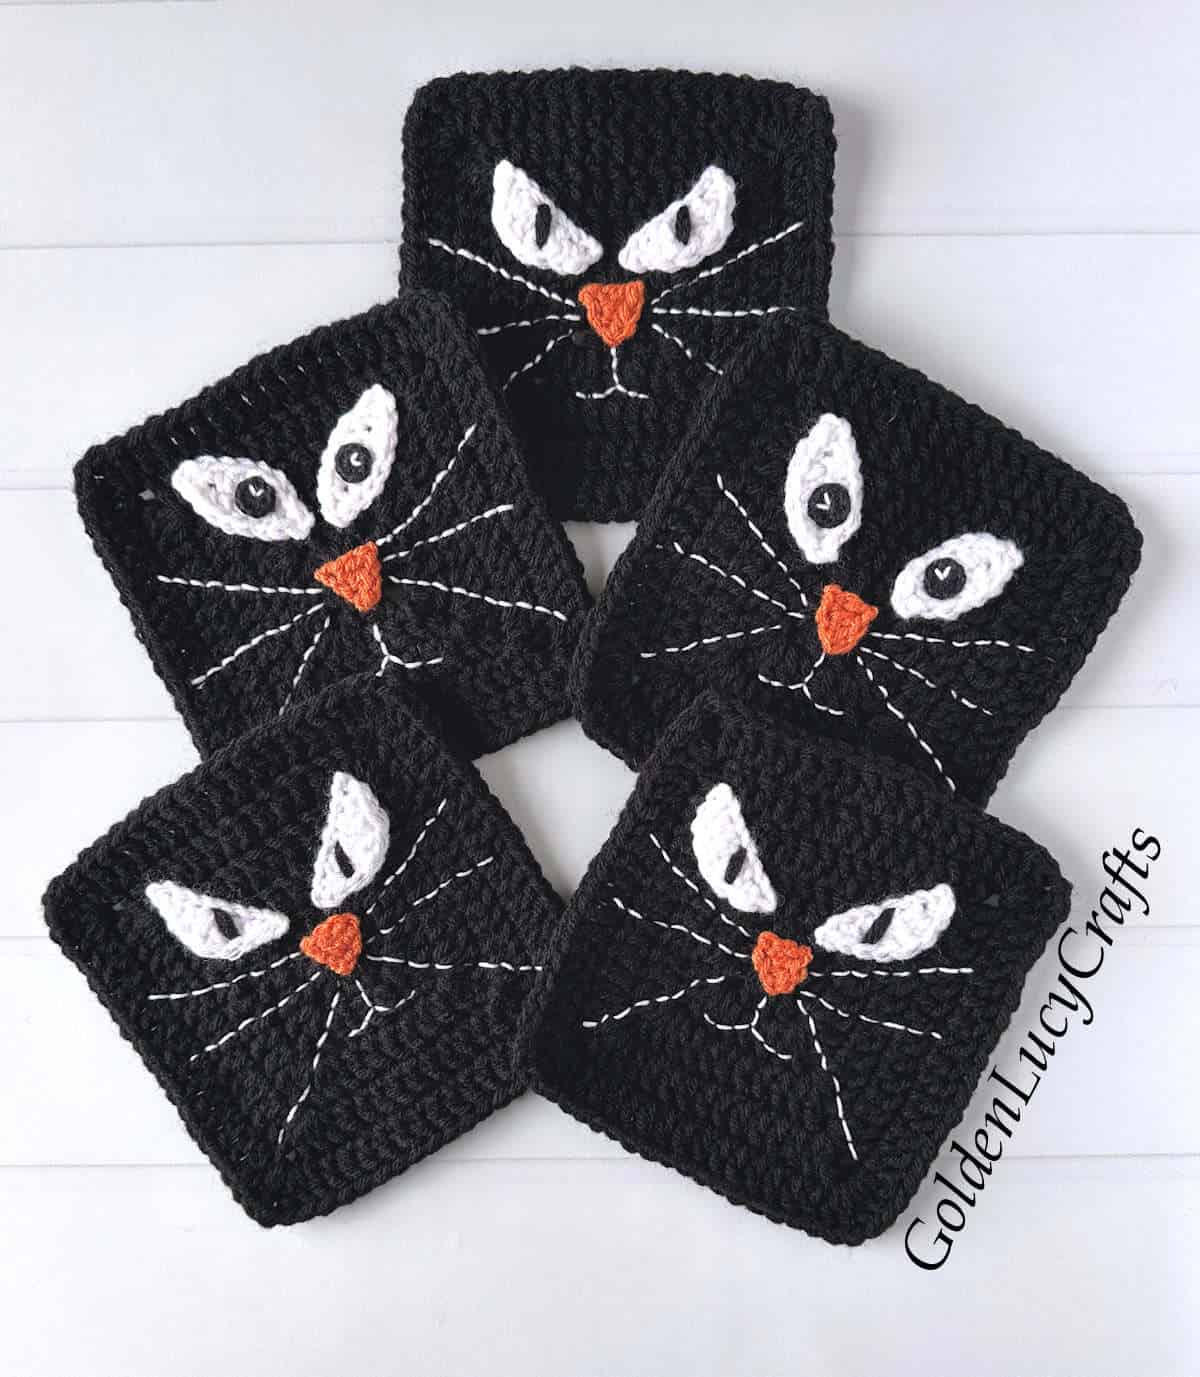 Five crocheted black squares with cat faces.